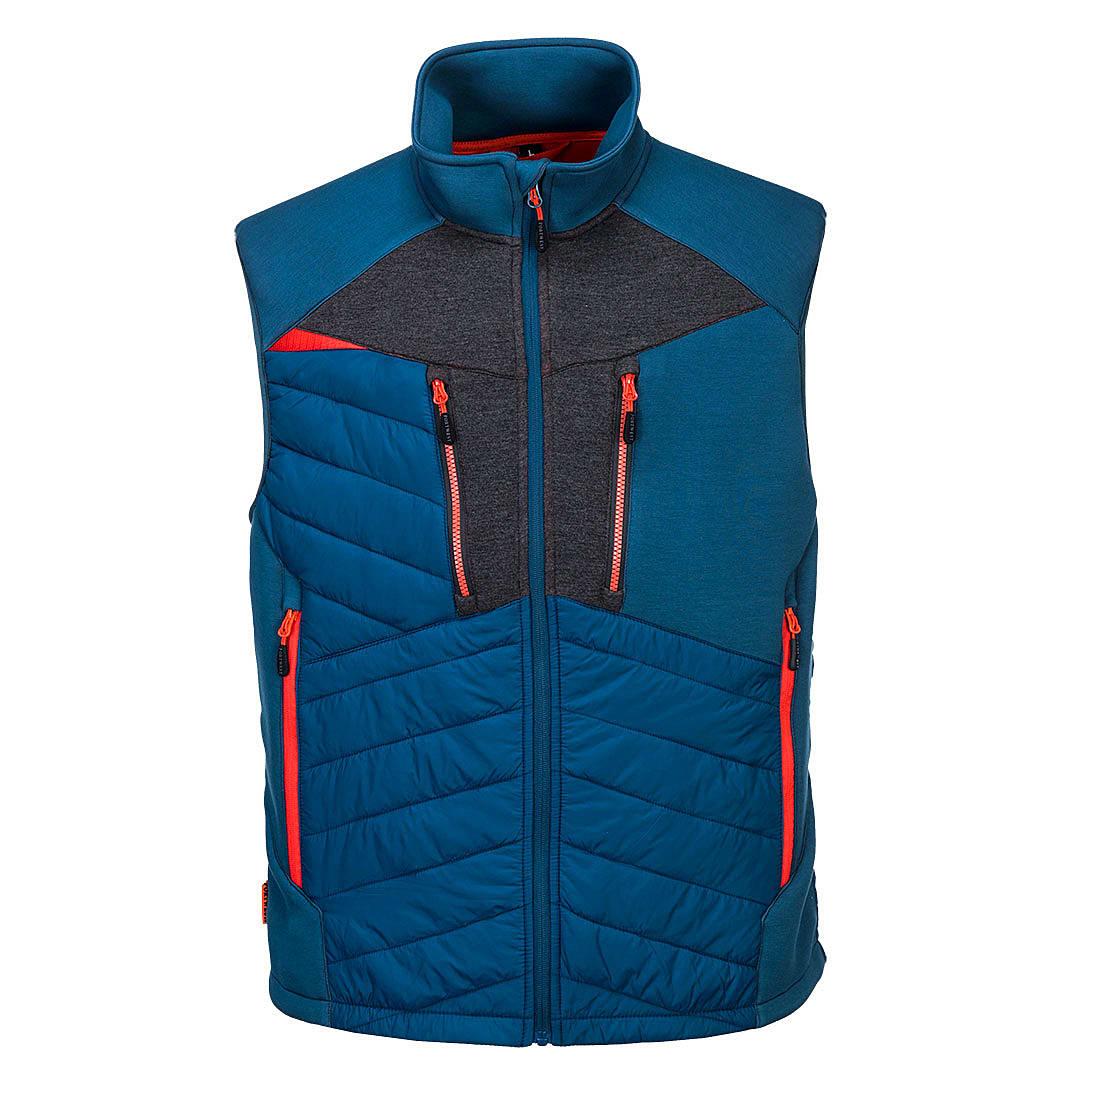 Portwest DX4 Baffle Gilet in Metro Blue (Product Code: DX470)